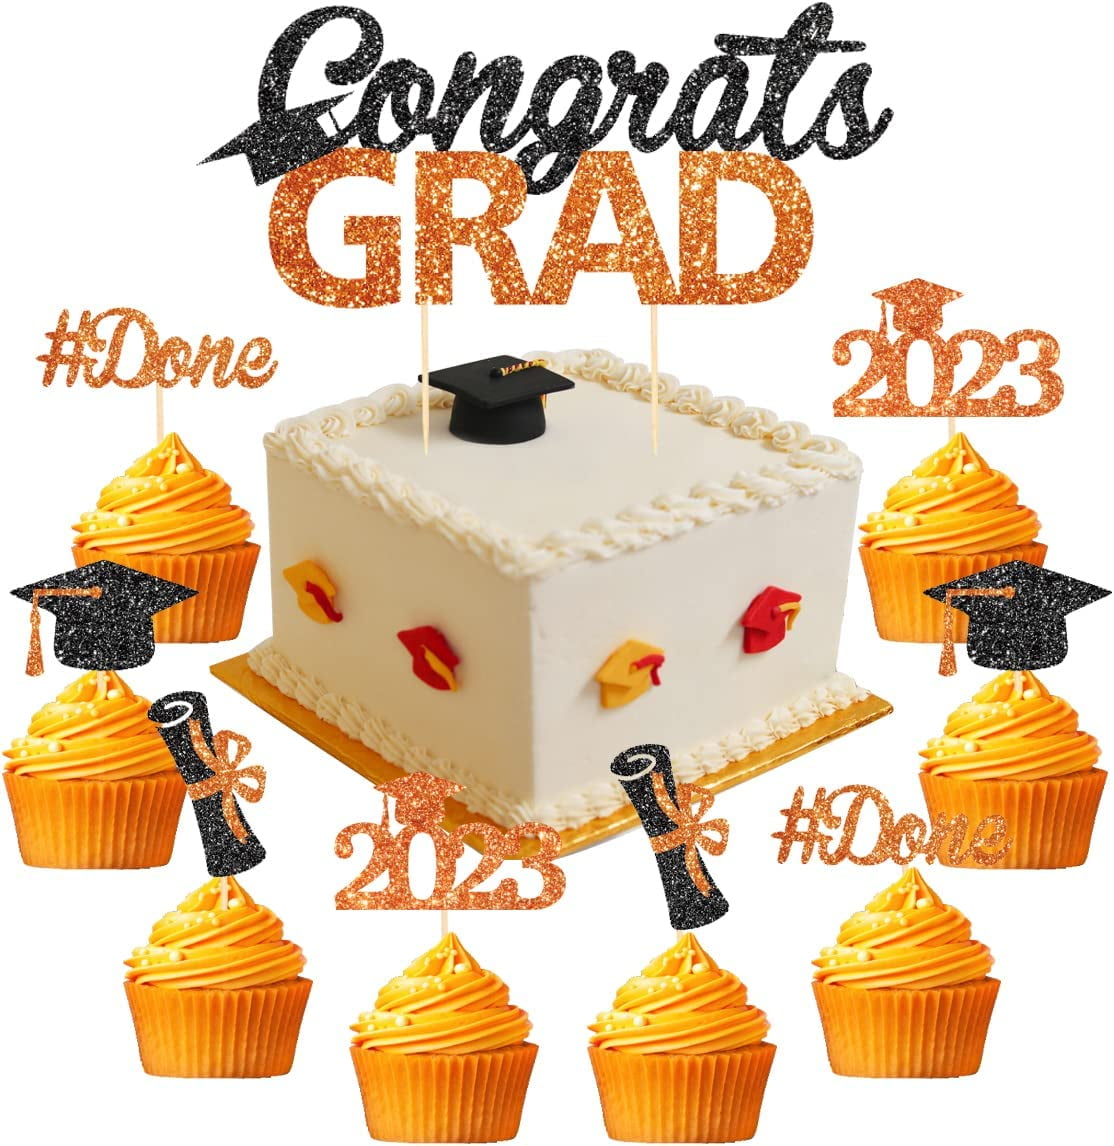 15 Easy Graduation Cake Ideas 2018 - Decorations for High School and College  Graduation Cakes